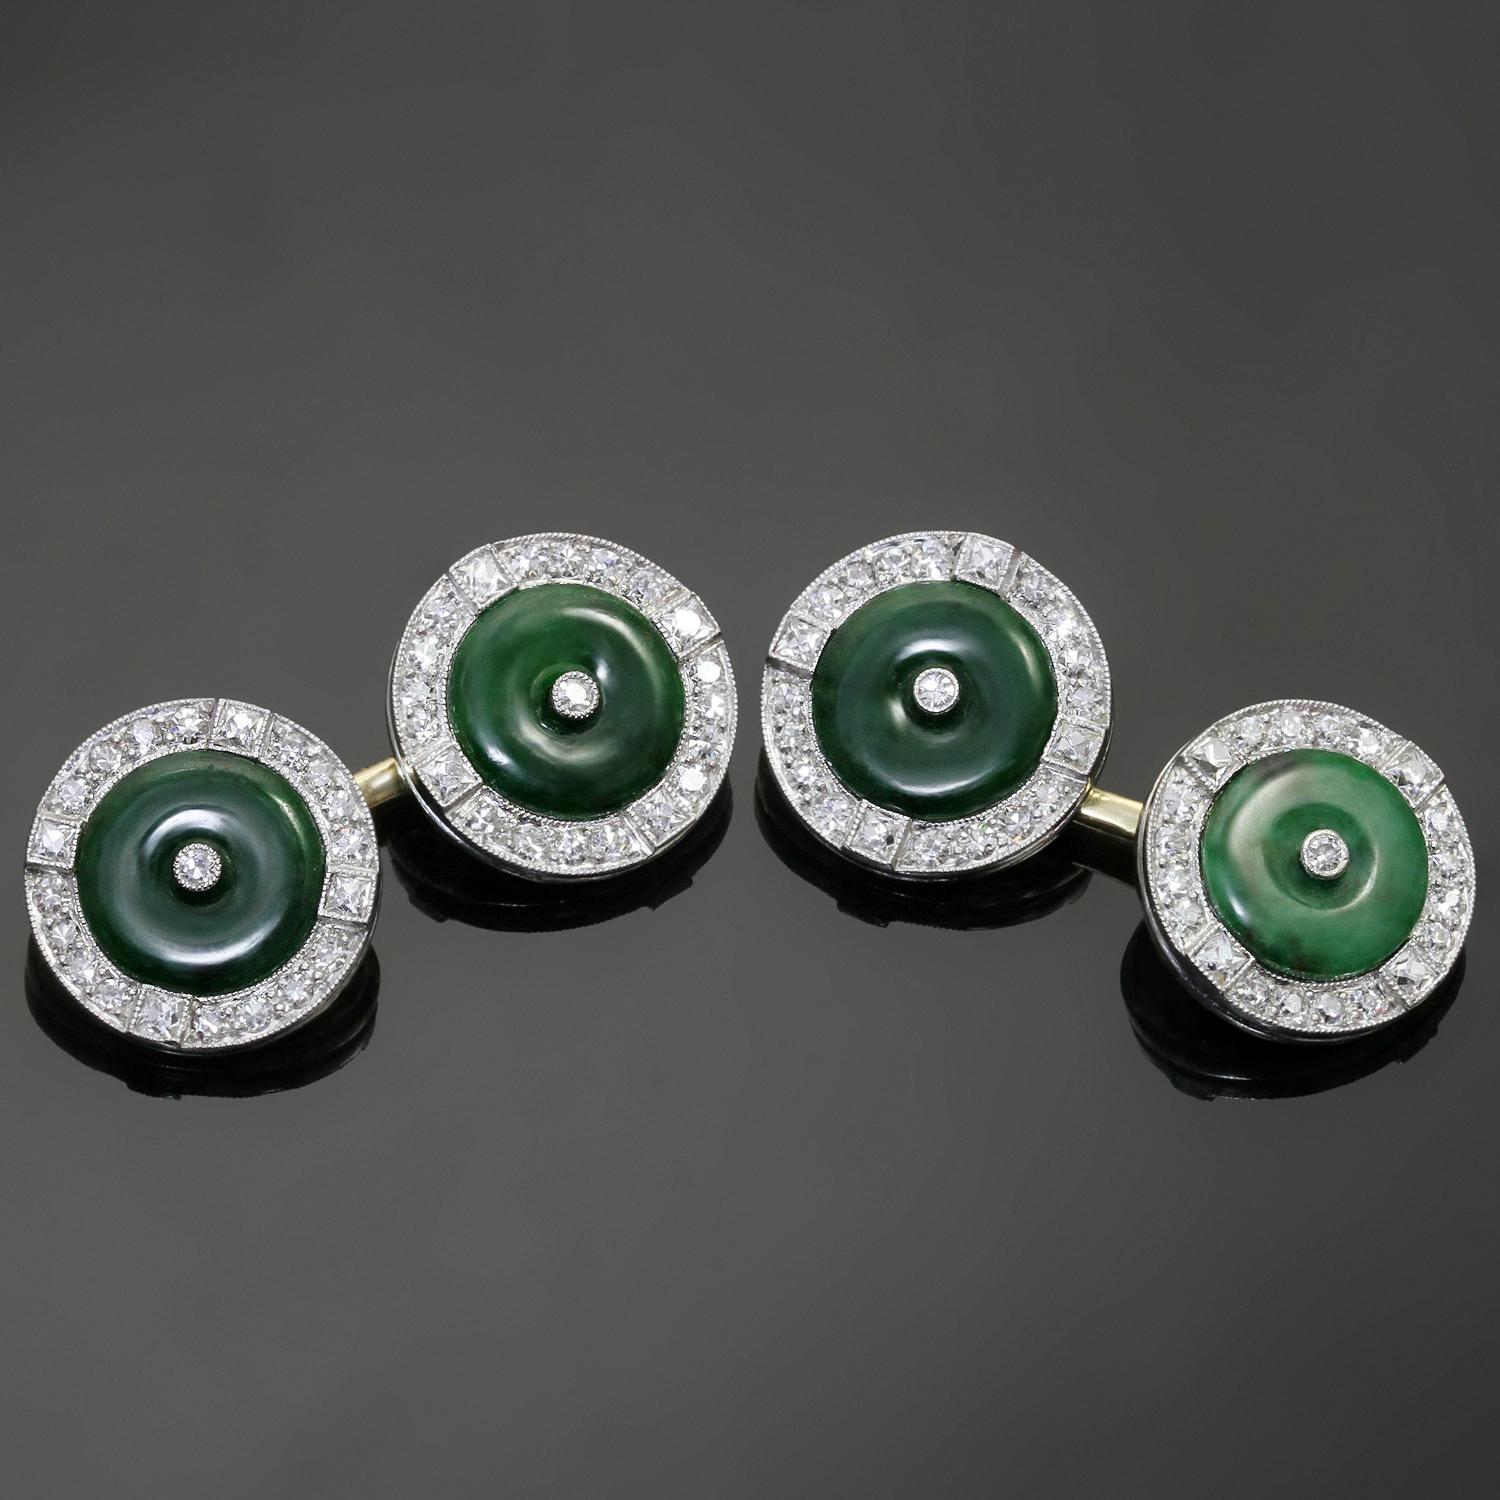 These lovely rare Art De-co  double-panel cuff-links of the very highest order. Masterfully handcrafted in platinum and 14k yellow gold and feature jadeite jade discs measuring 8.81mm x 1.86mm, 64 enhanced with single-cut diamonds weighing an